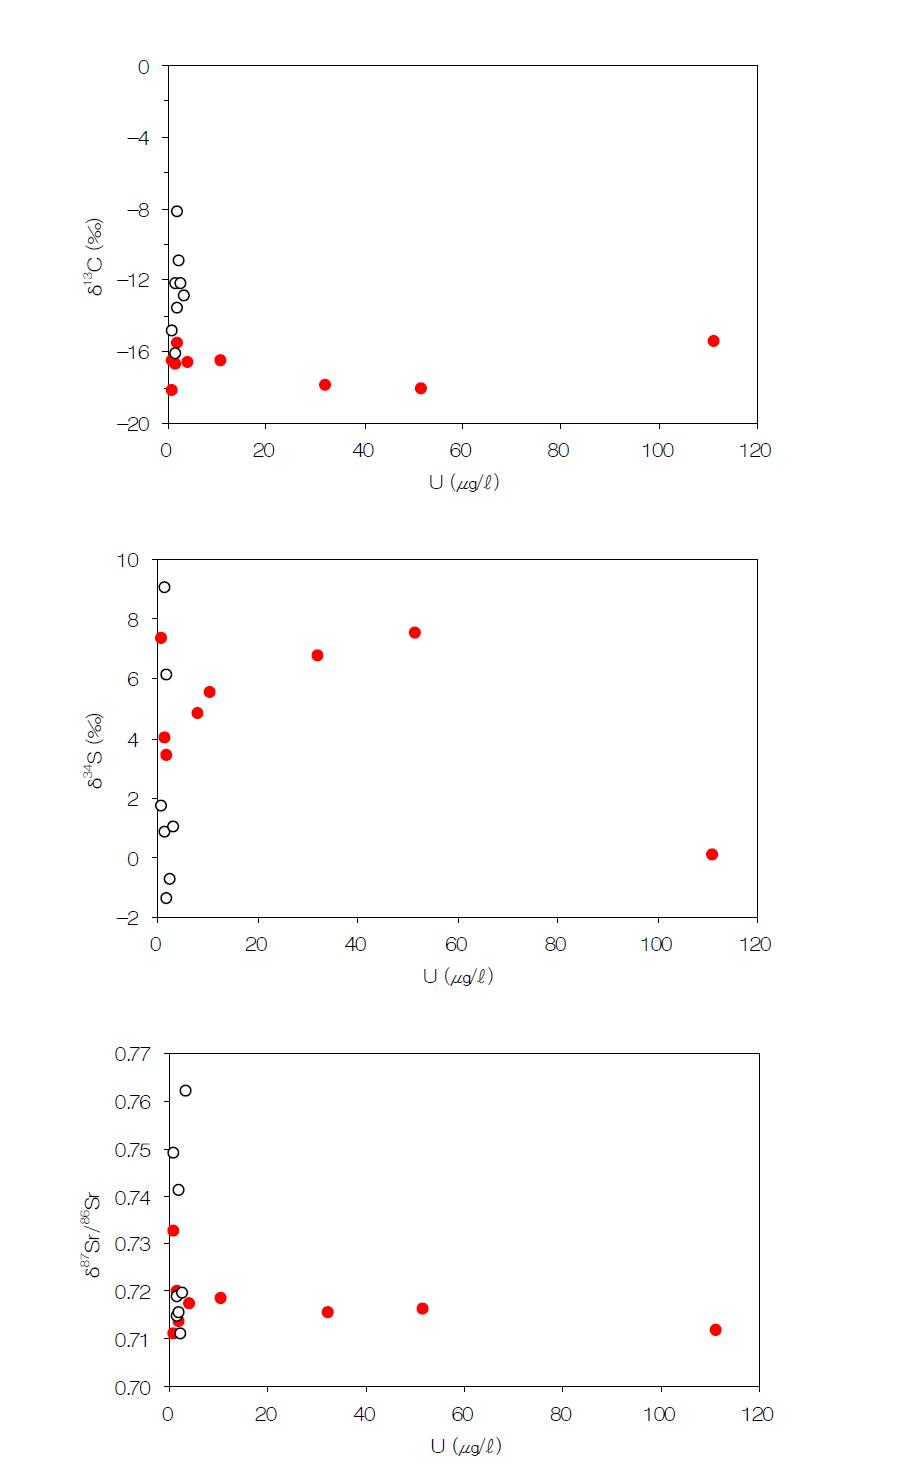 Plot of U(mg/L) versus δ 14S(‰), δ 13C(‰) and 87/86Sr(ratio) of groundwater samples.